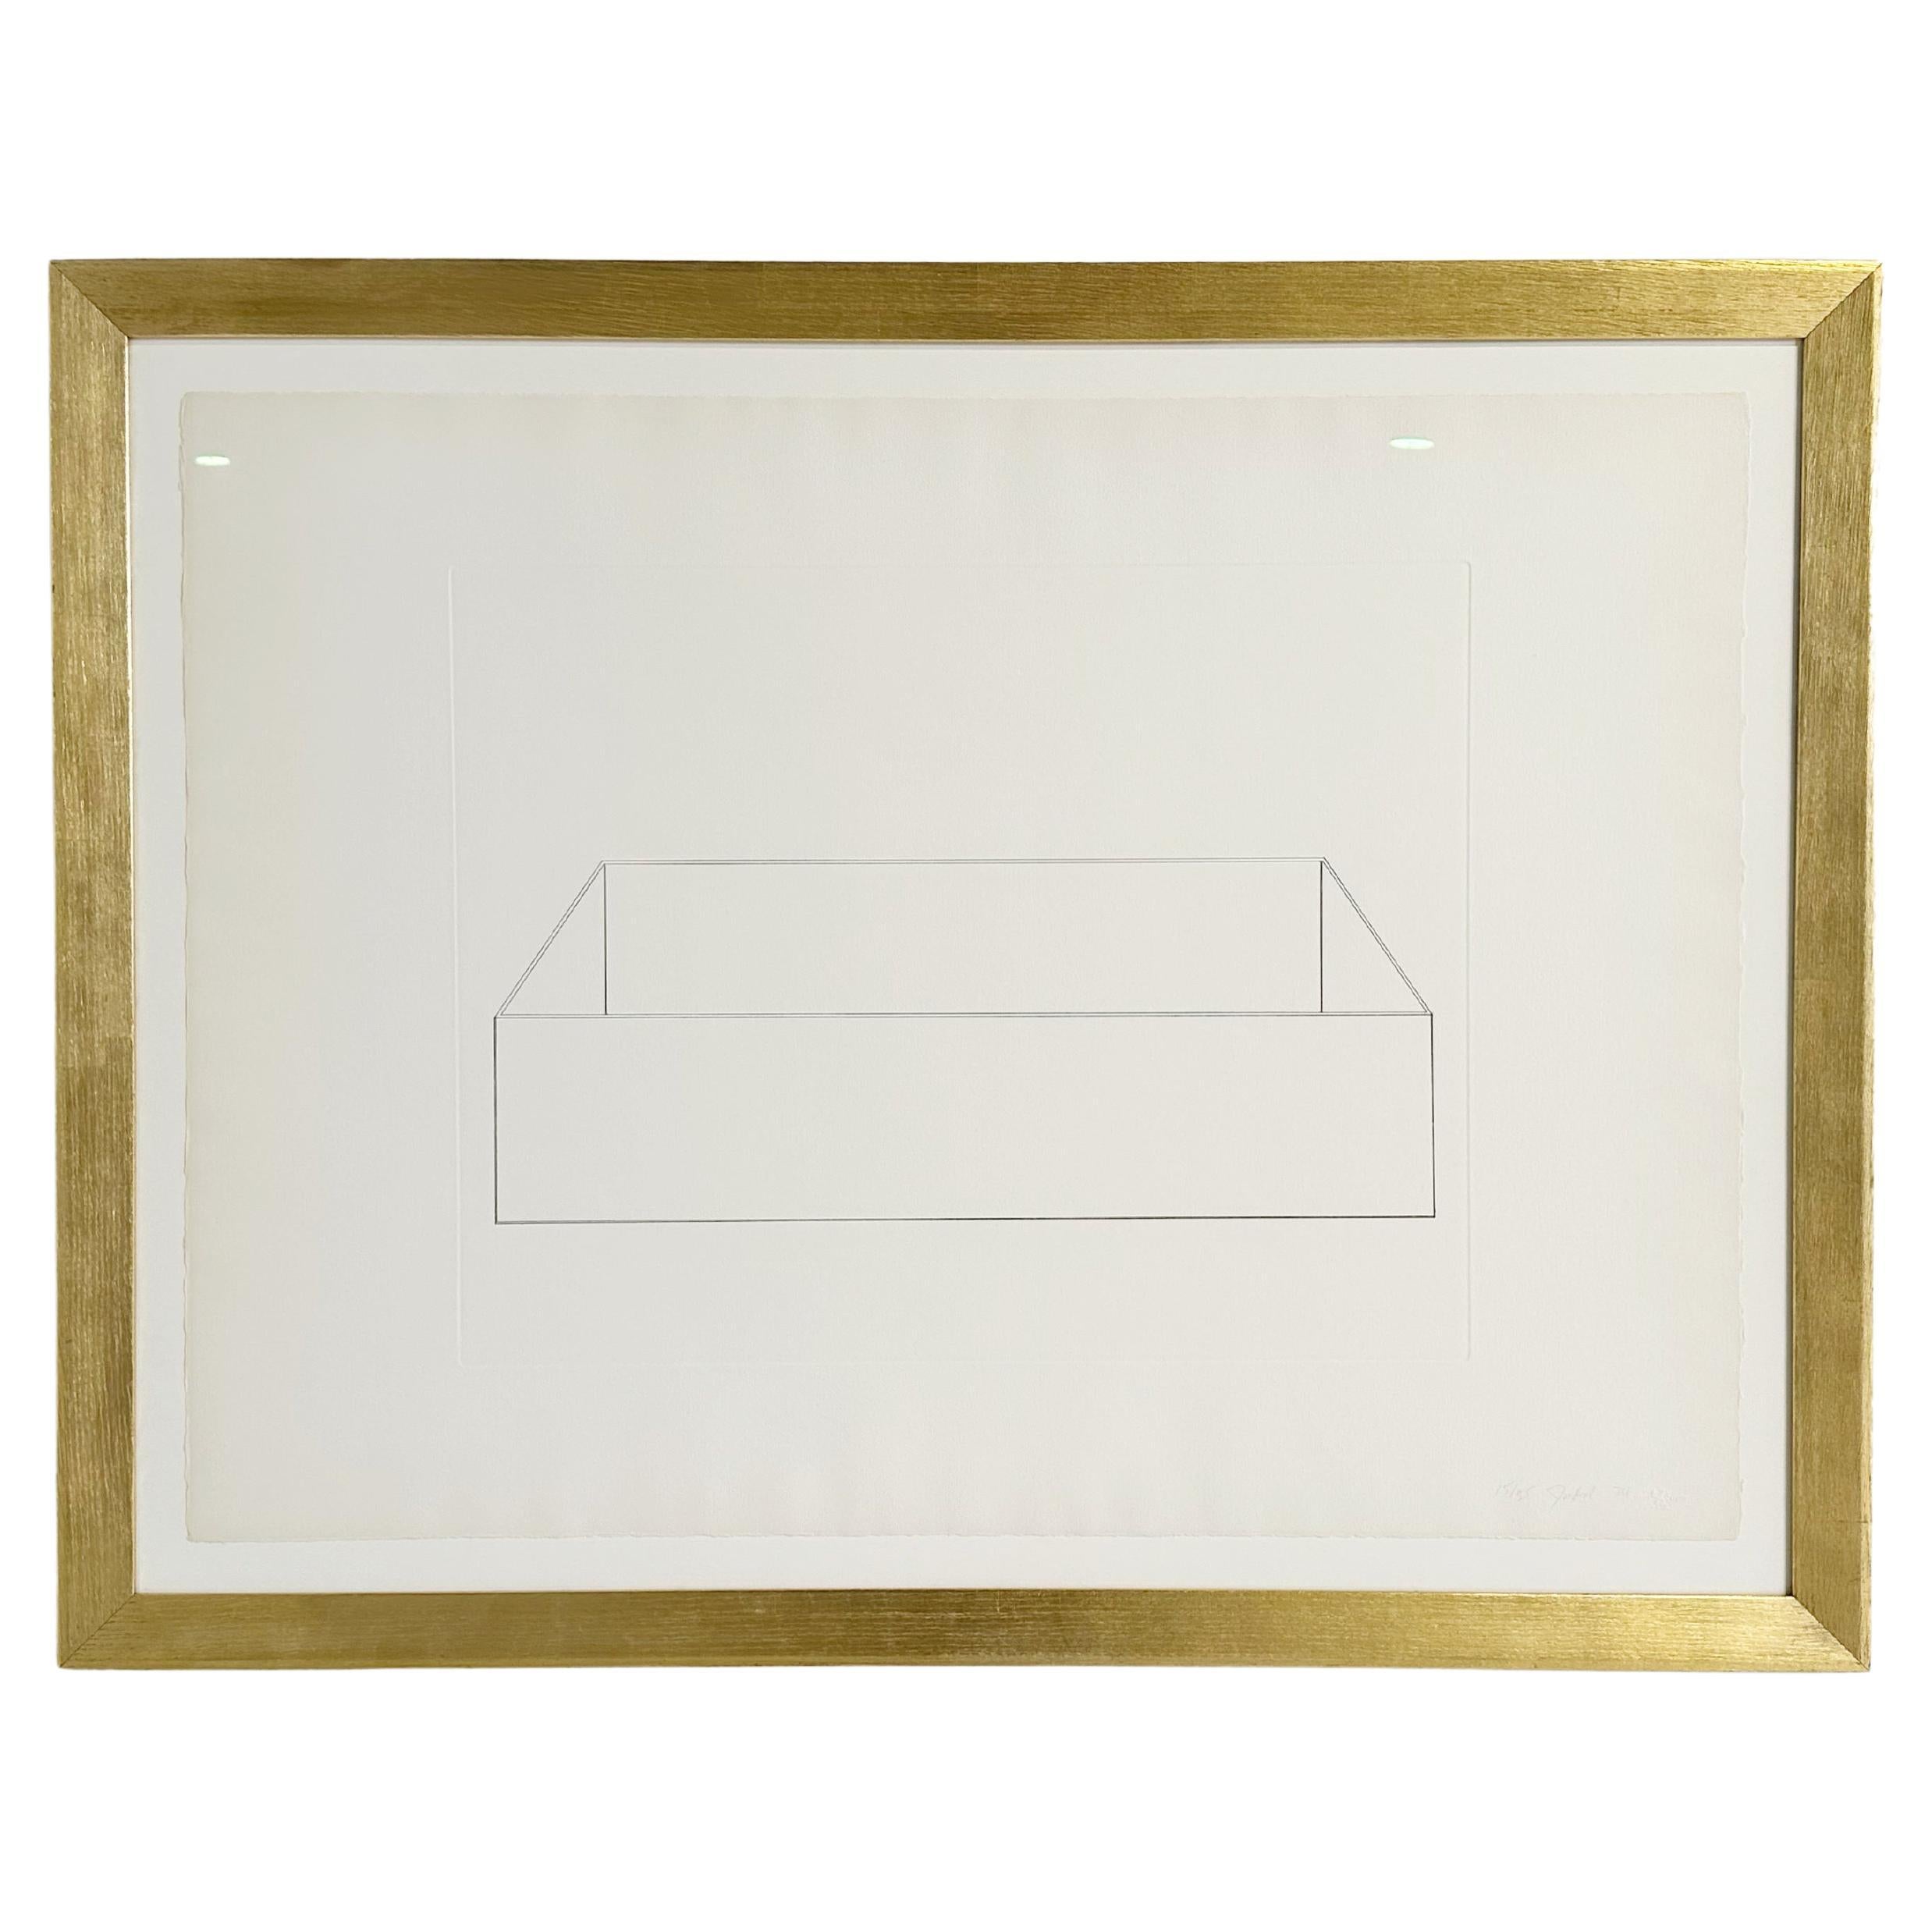 Donald Judd, 'Untitled' 1974, Etching For Sale